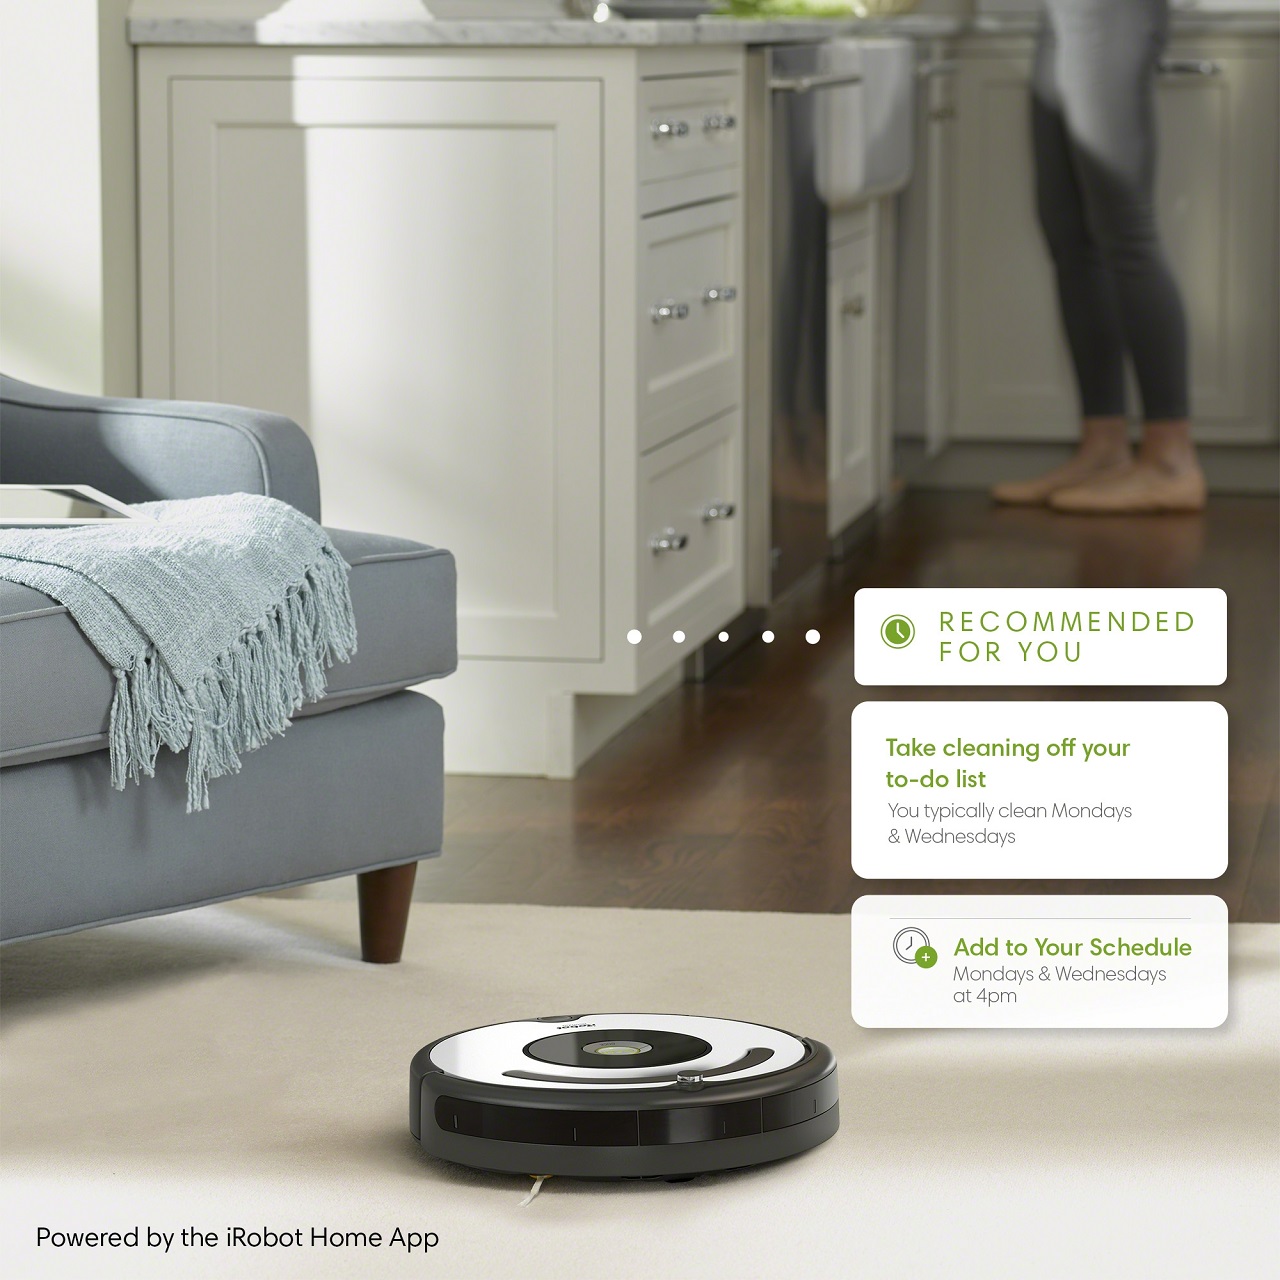 iRobot Roomba 670 Robot Vacuum-Wi-Fi Connectivity, Works with Google Home, Good for Pet Hair, Carpets, Hard Floors, Self-Charging - image 11 of 12